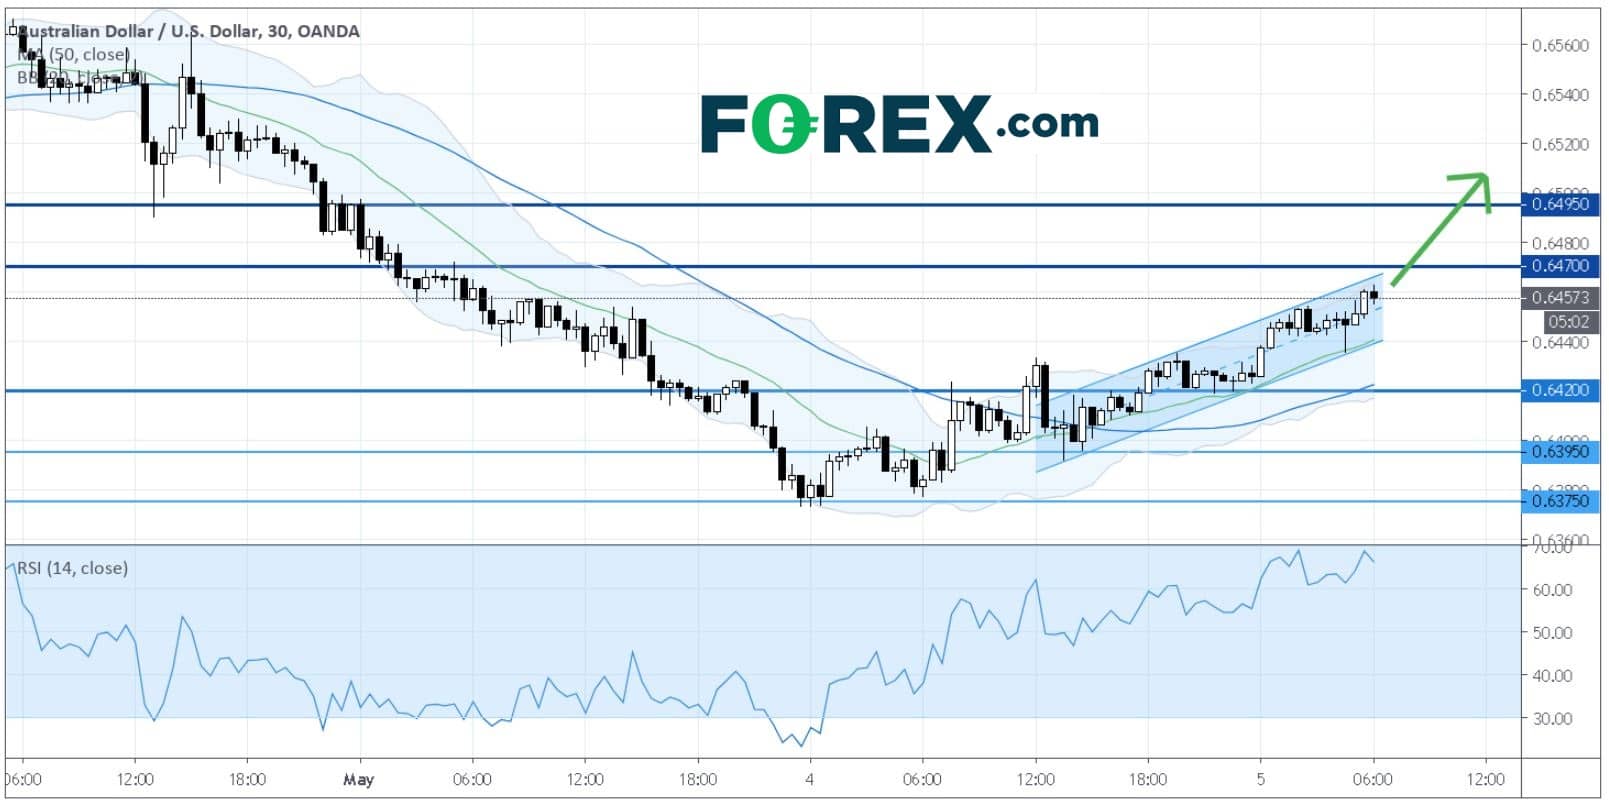 Market chart demonstrating AUD VS USD Keeps Bullish Bias As Bra Hold Rates. Published in May 2020 by FOREX.com